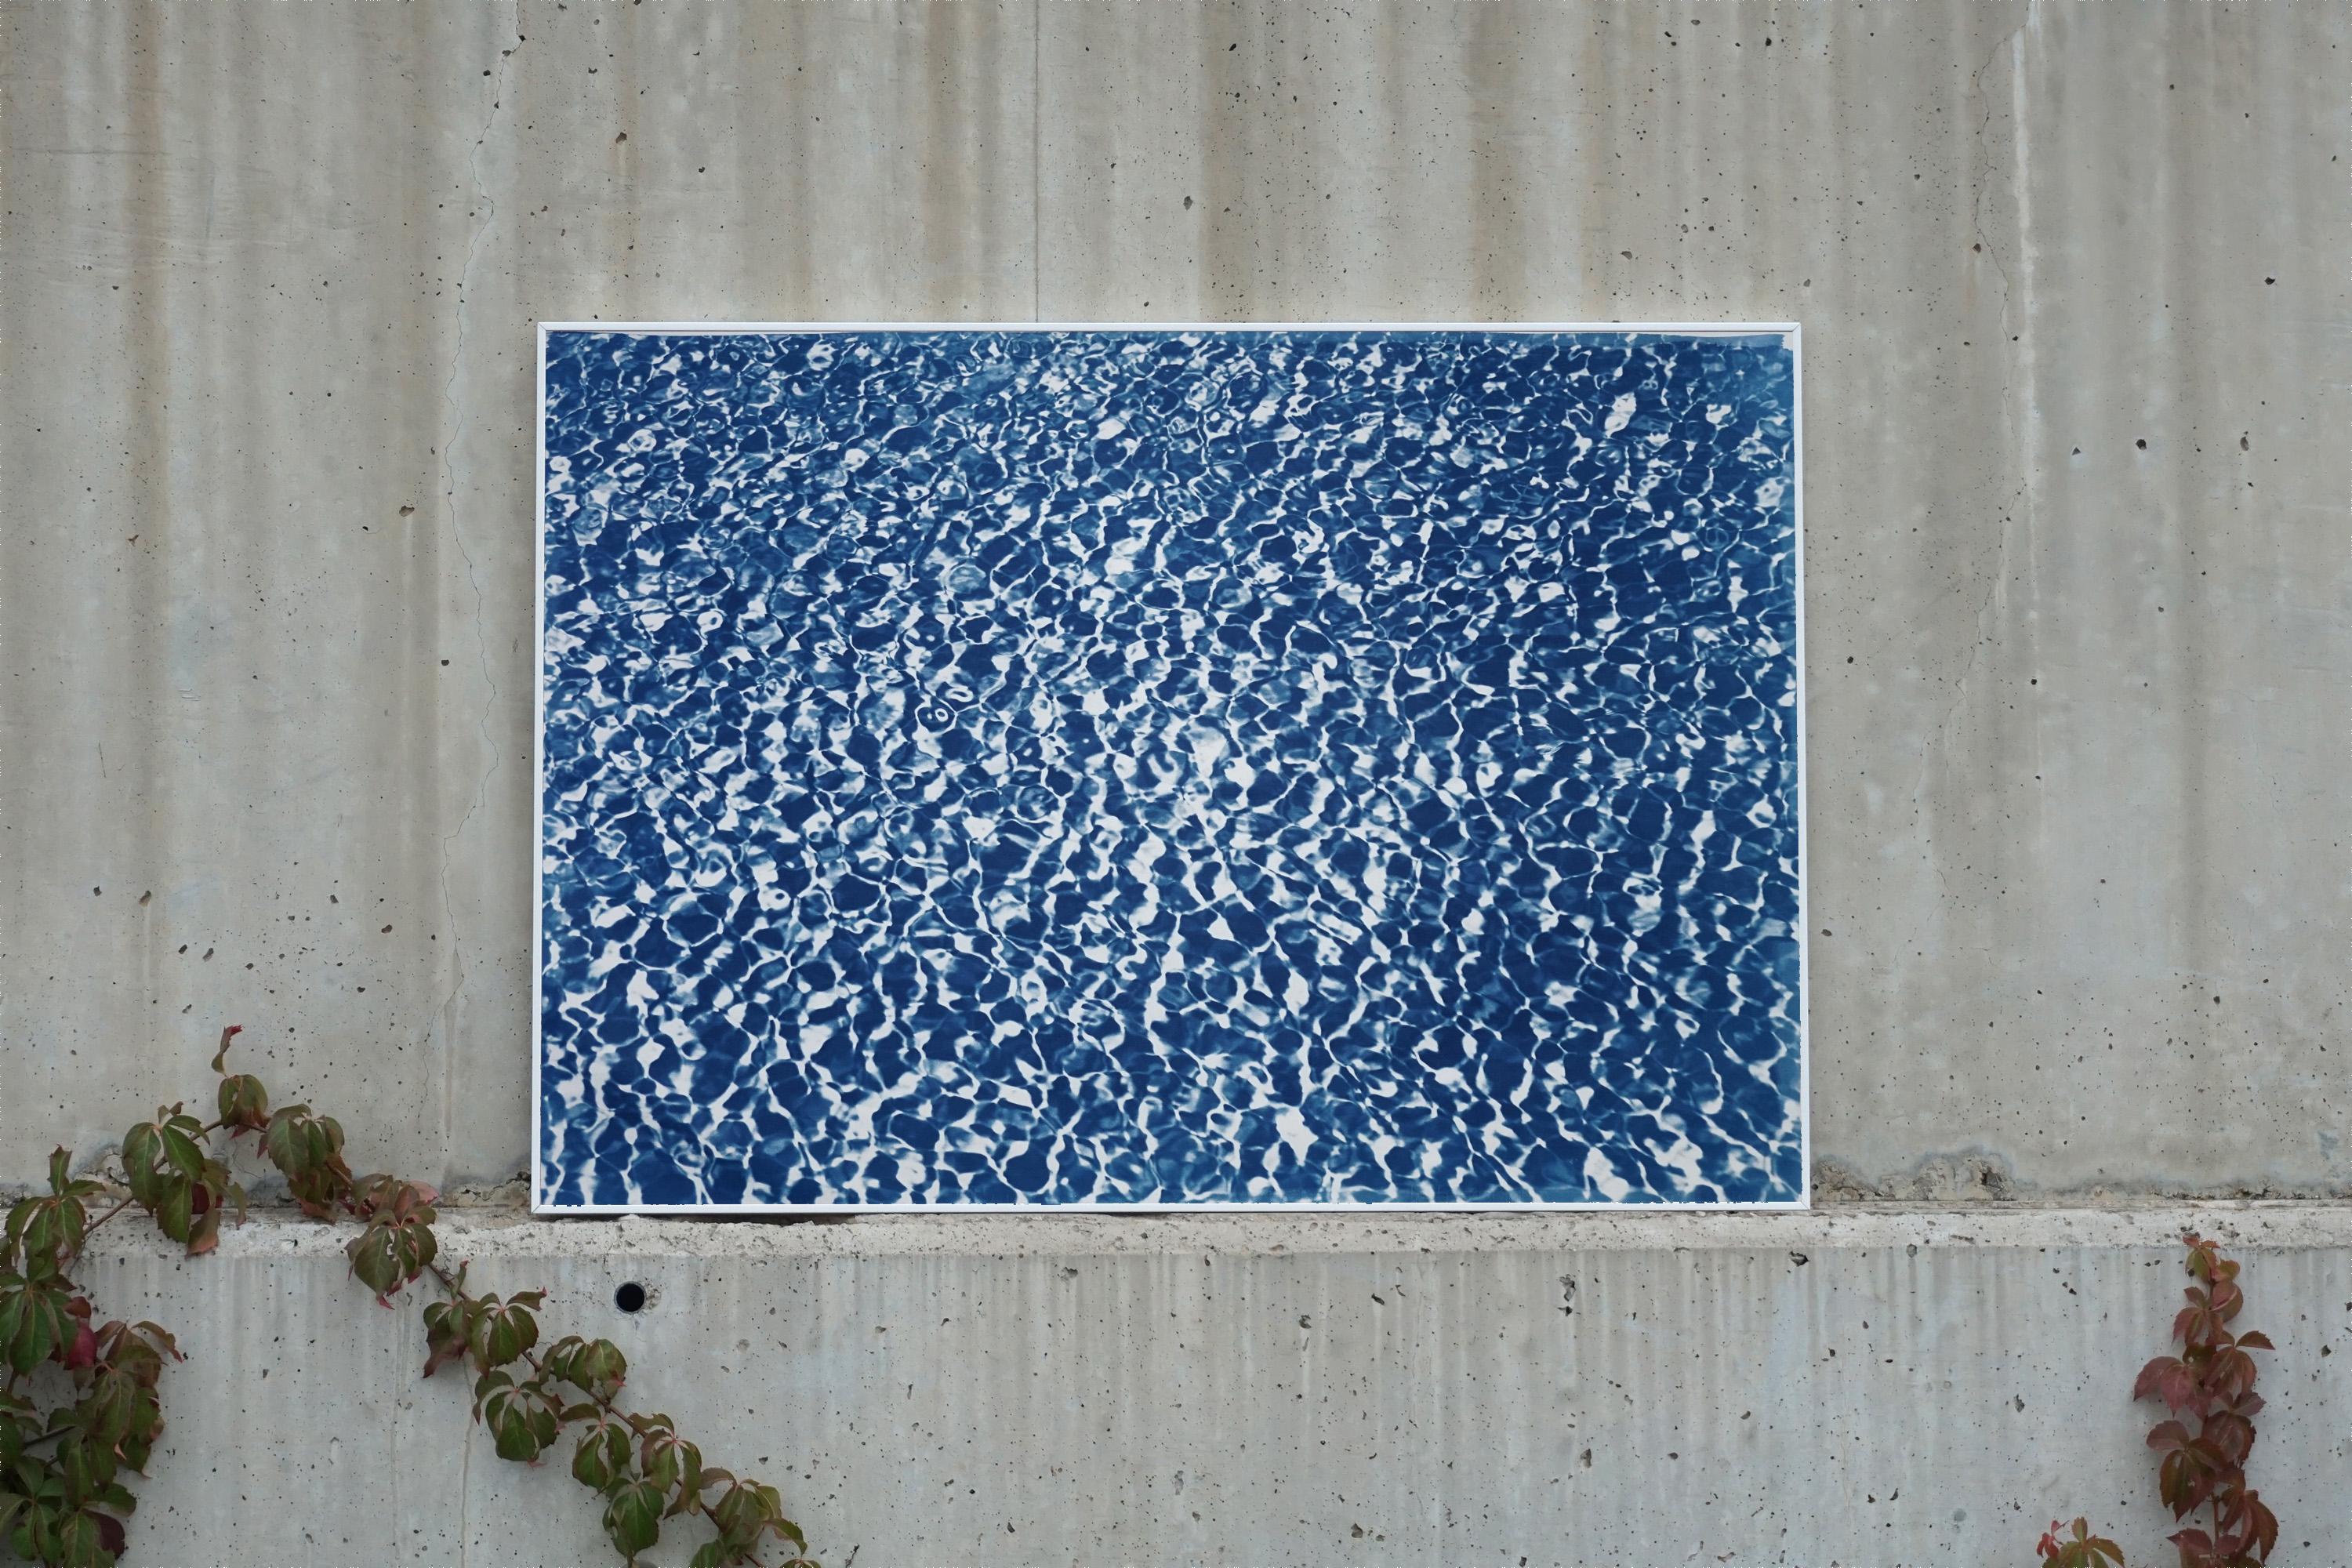 Handmade Cyanotype of Infinity Pool Water Reflecctiona, Blue and White on Paper - Print by Kind of Cyan